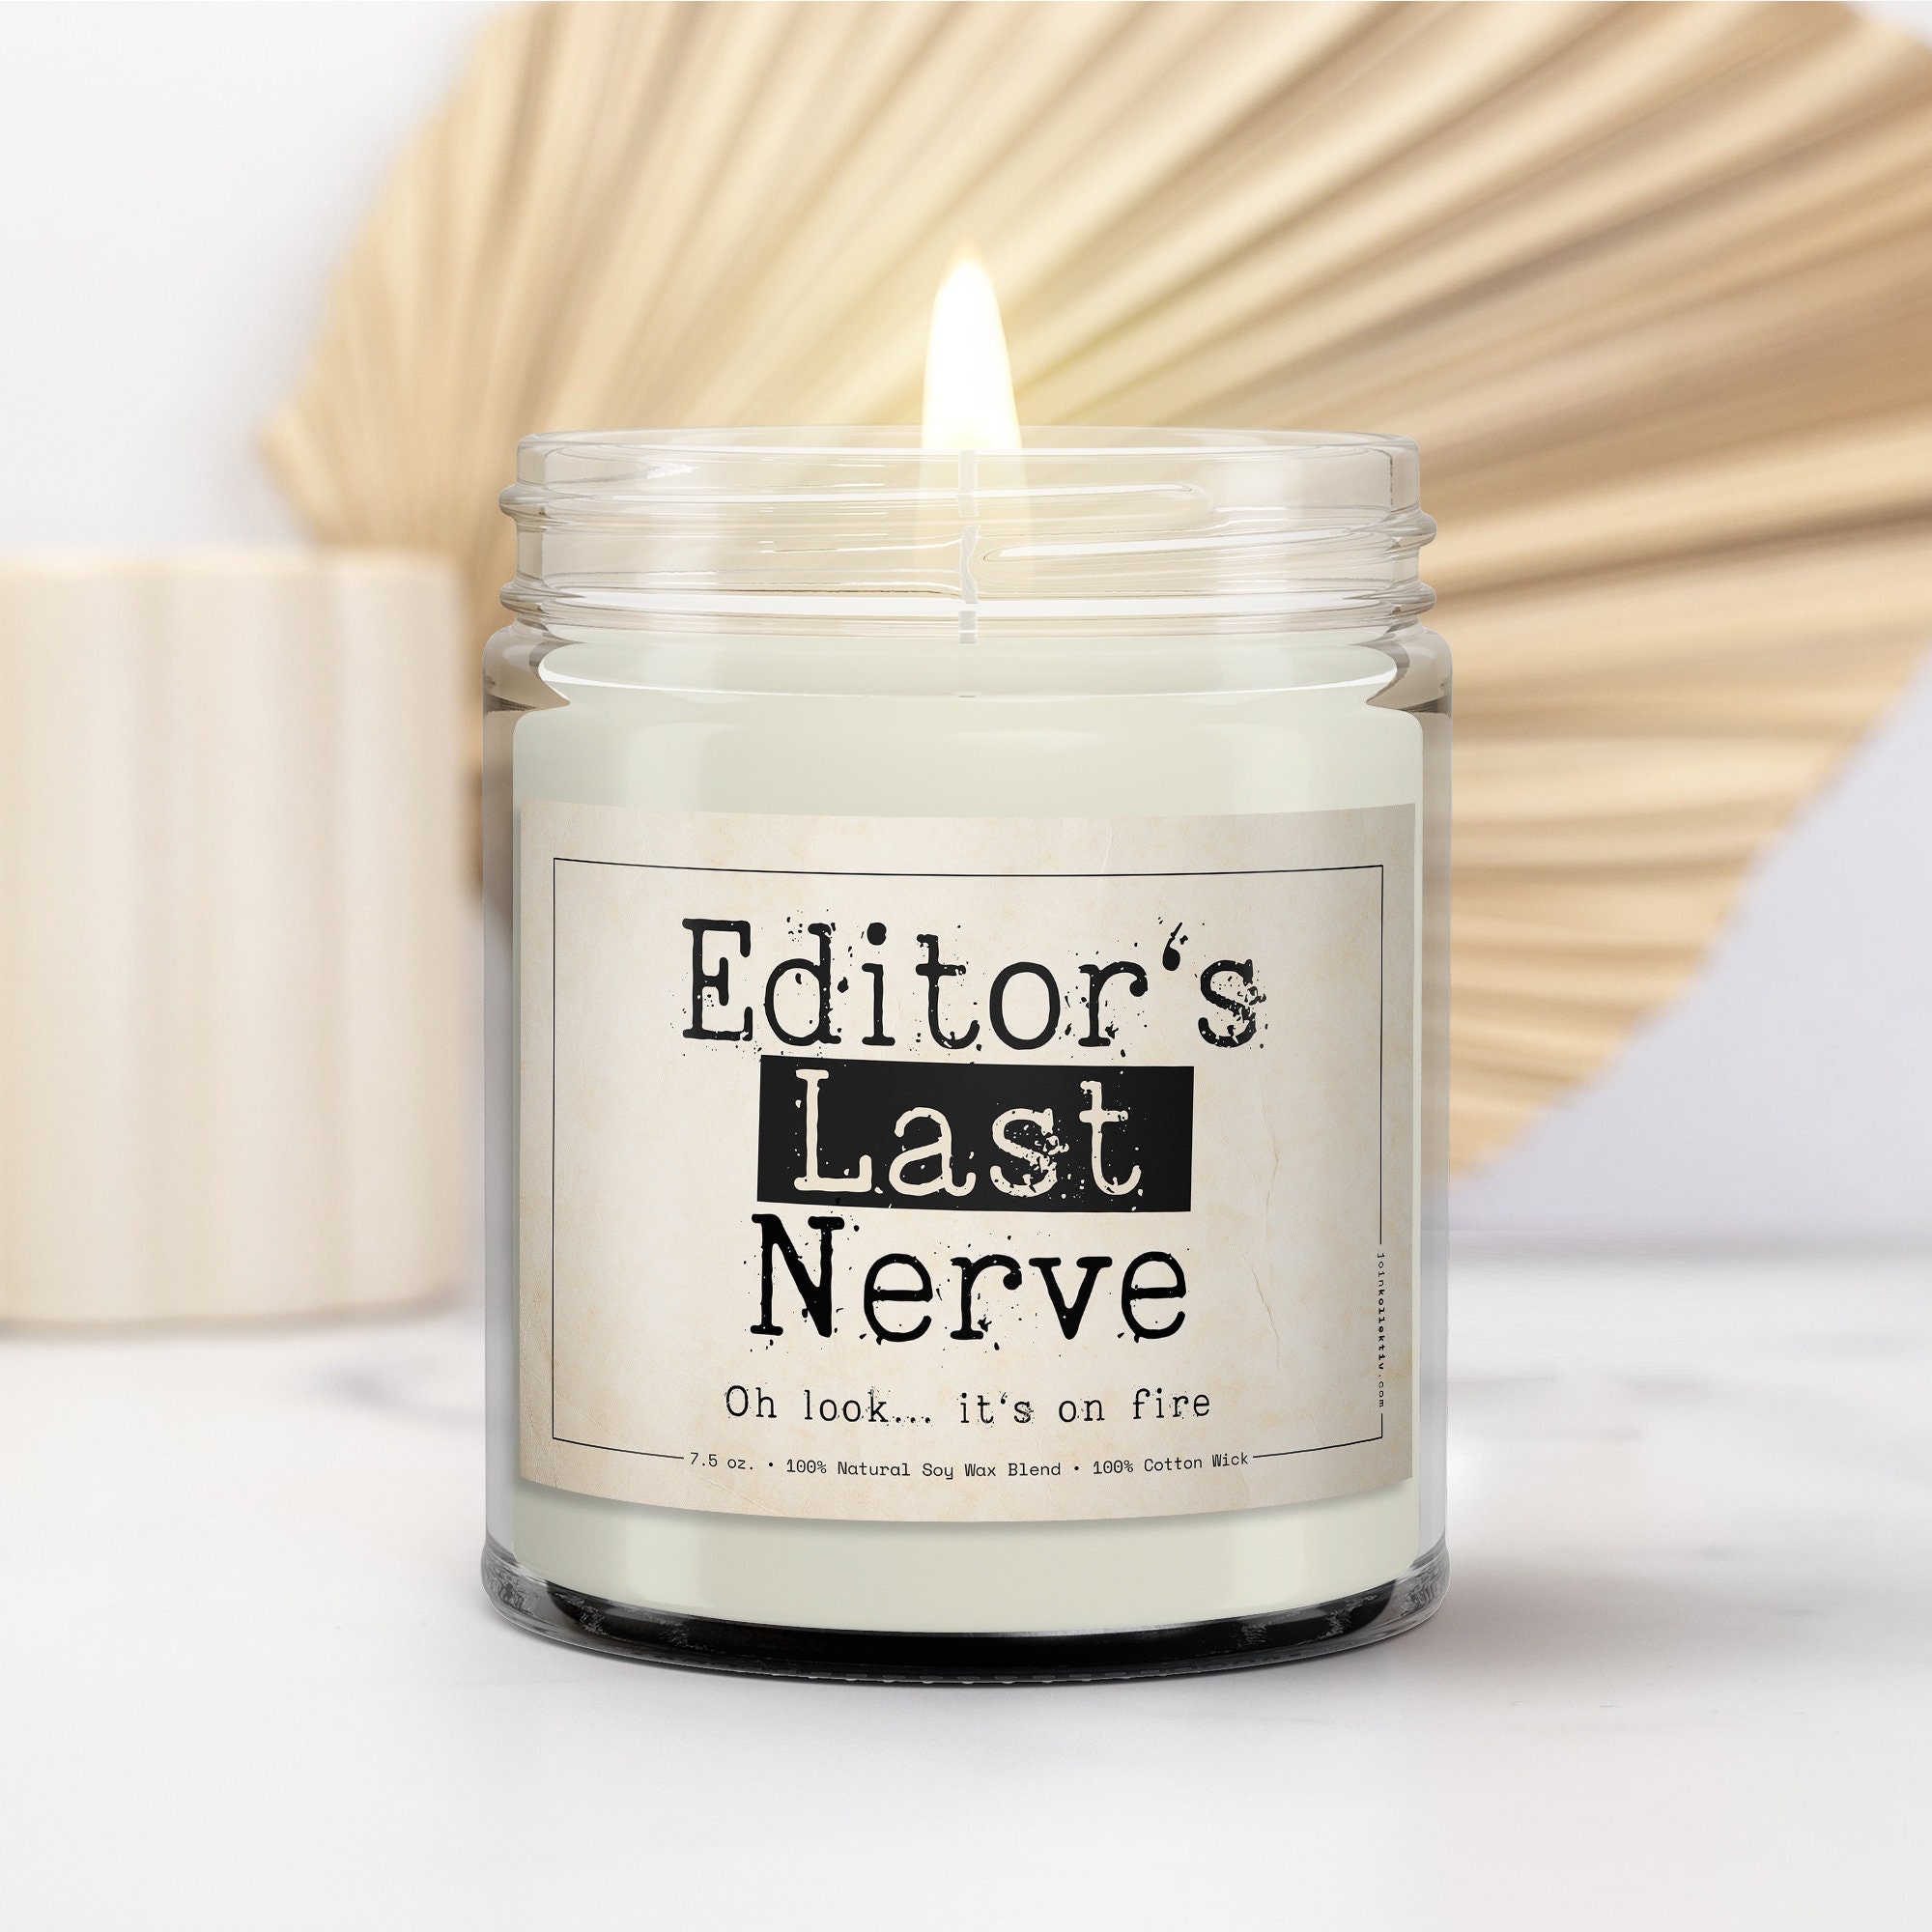 Mom's Last Nerve, Personalized Gift For Mom, Soy Candle, Funny Mother's Day  Gift, Anniversary Gift For Him, Mothers Day Candle, 9 Oz Vanilla Scented -  Best Canvas Wall Art